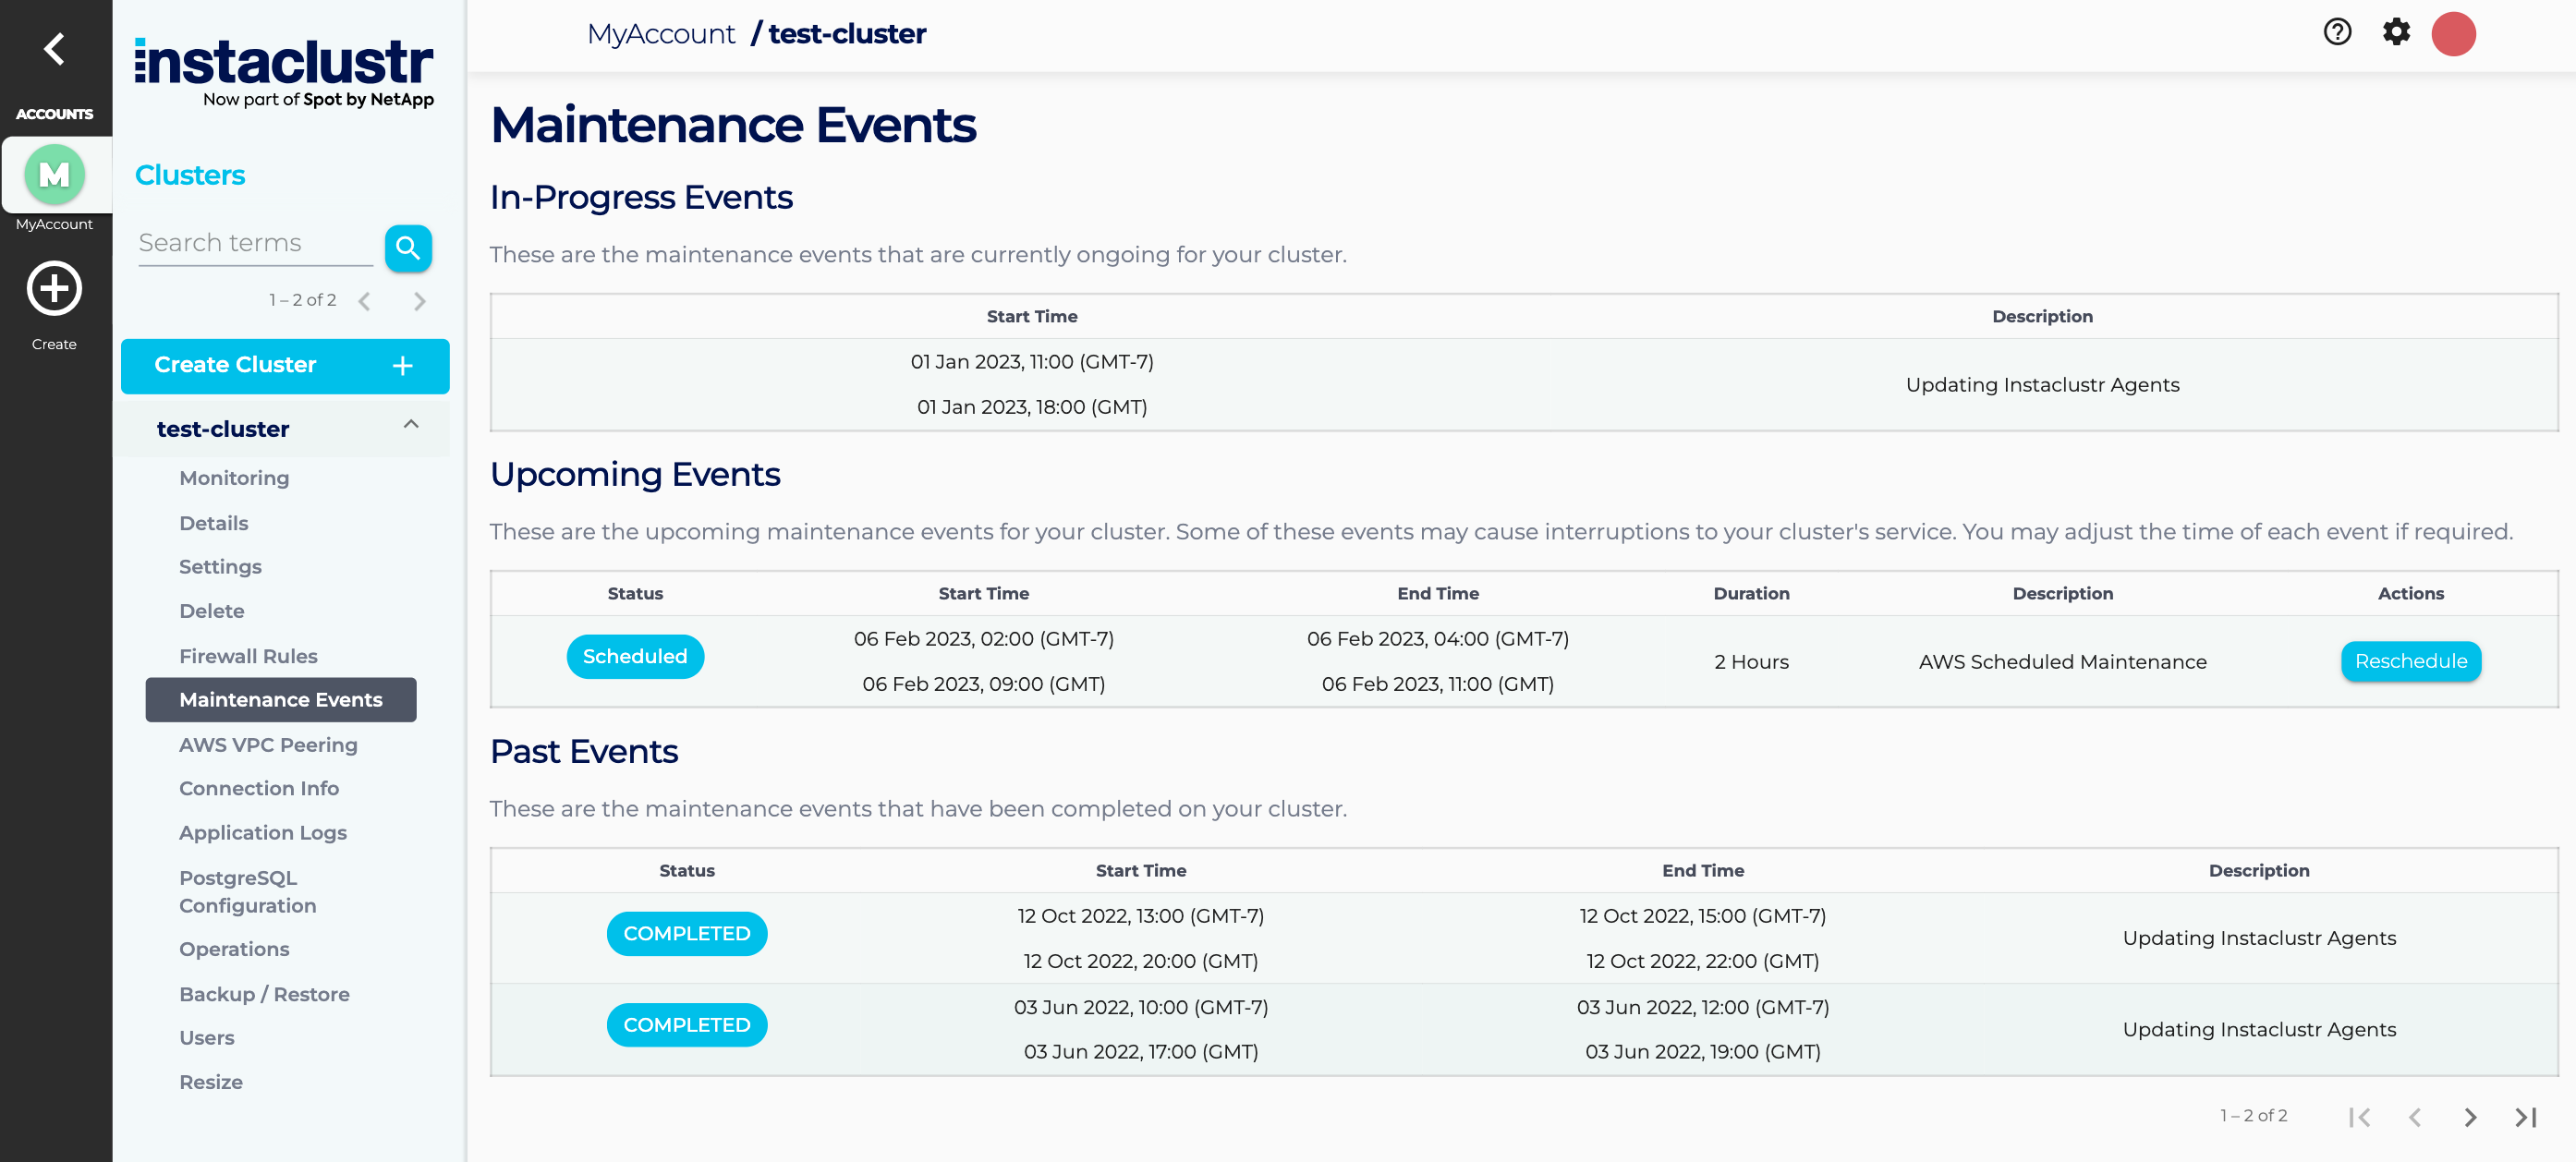 The cluster's maintenance events are listed in tables.  table for each of In-Progress events, Upcoming Events and Past Events. Details shown include start and finish times and a description of the maintenance